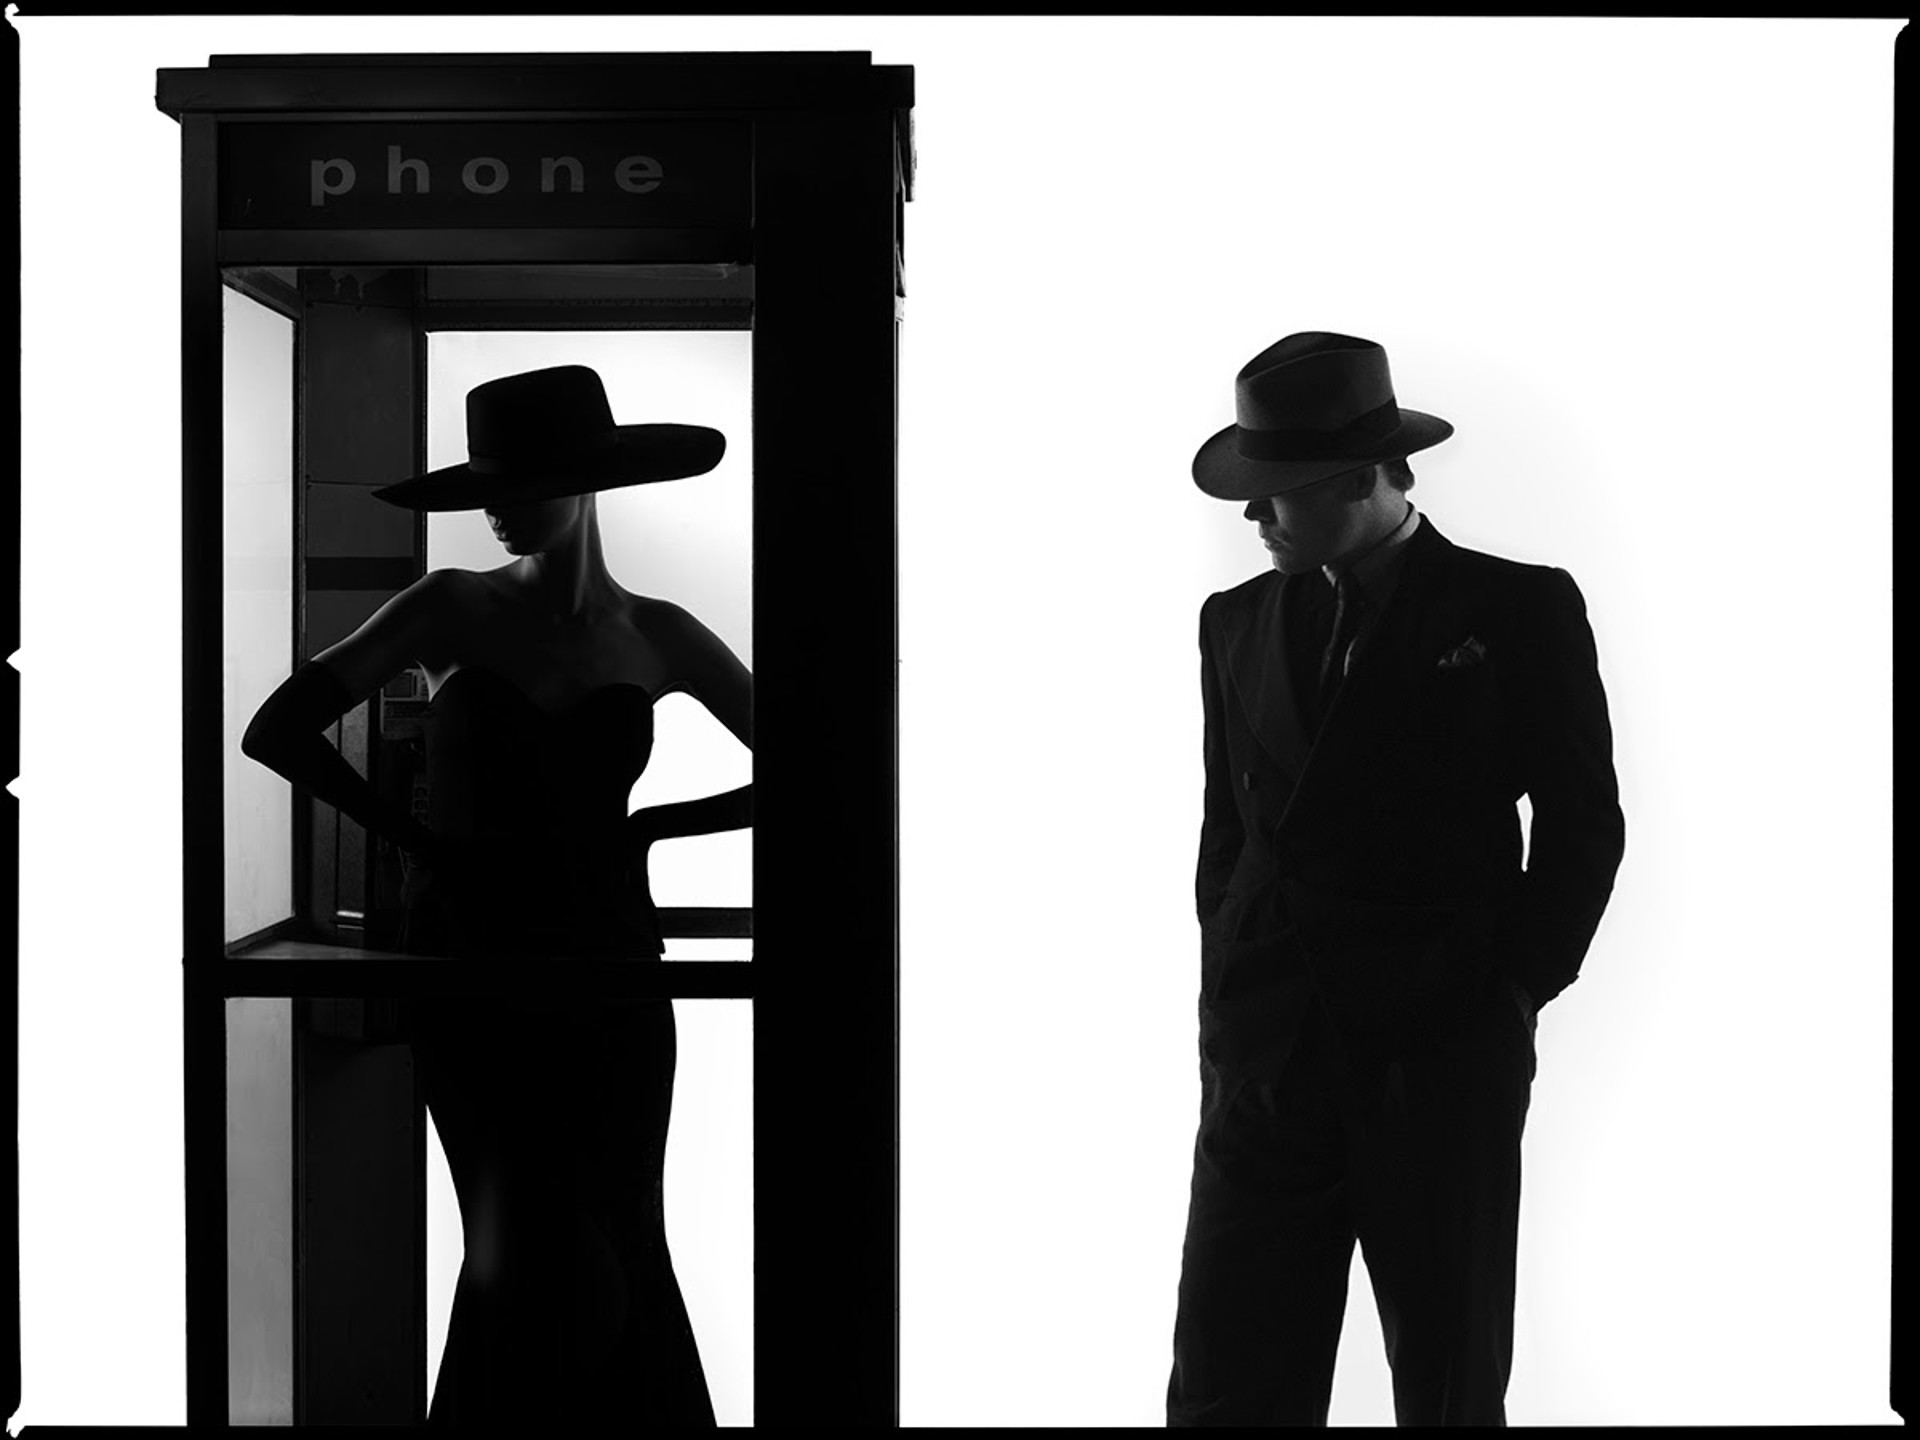 Phonebooth Silhouette by Tyler Shields